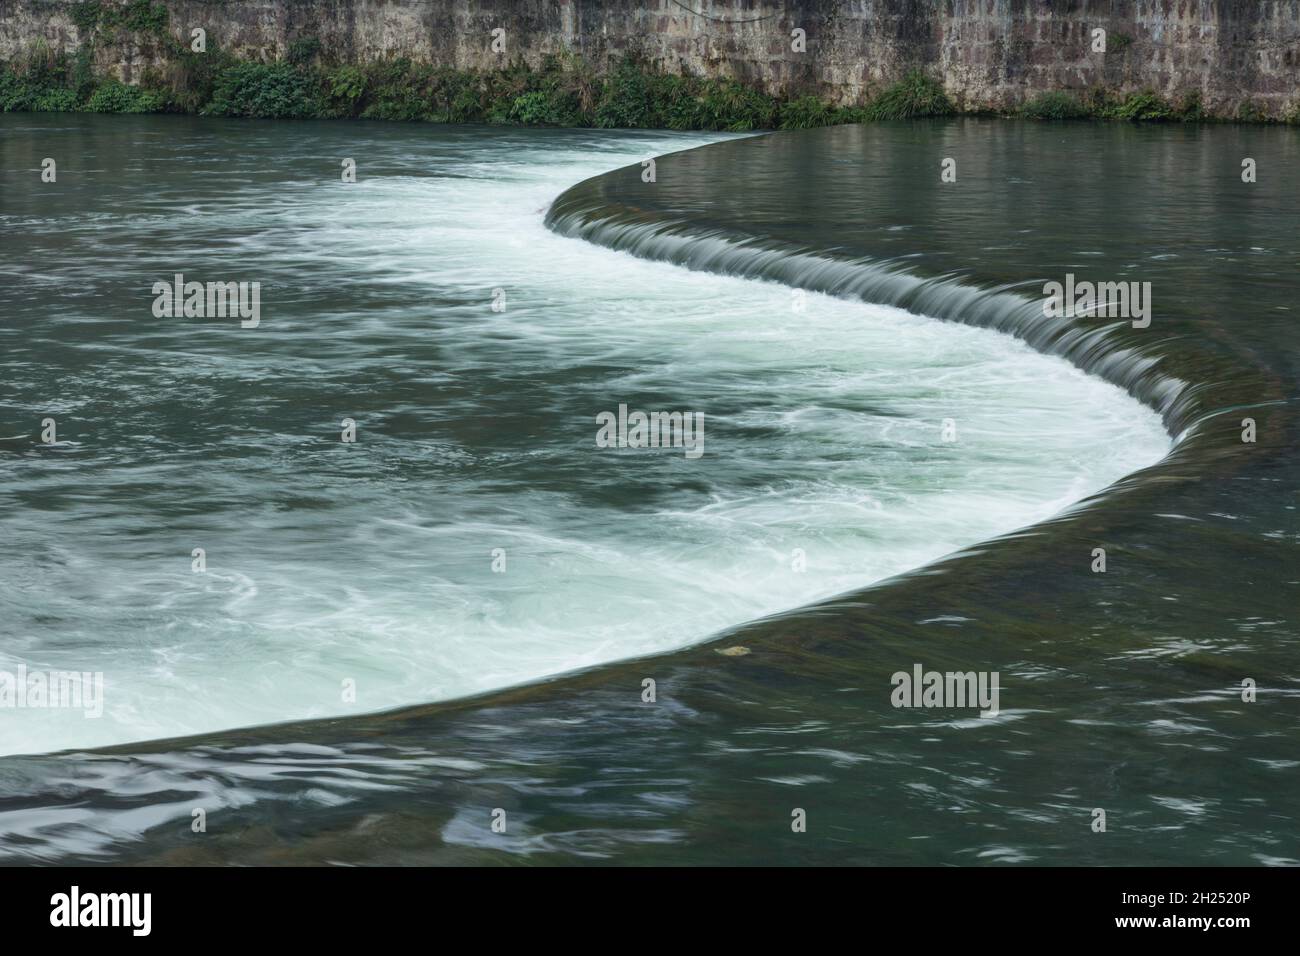 Water flows over an s-shaped weir across the Tuojiang River in Fenghuang, China. Stock Photo